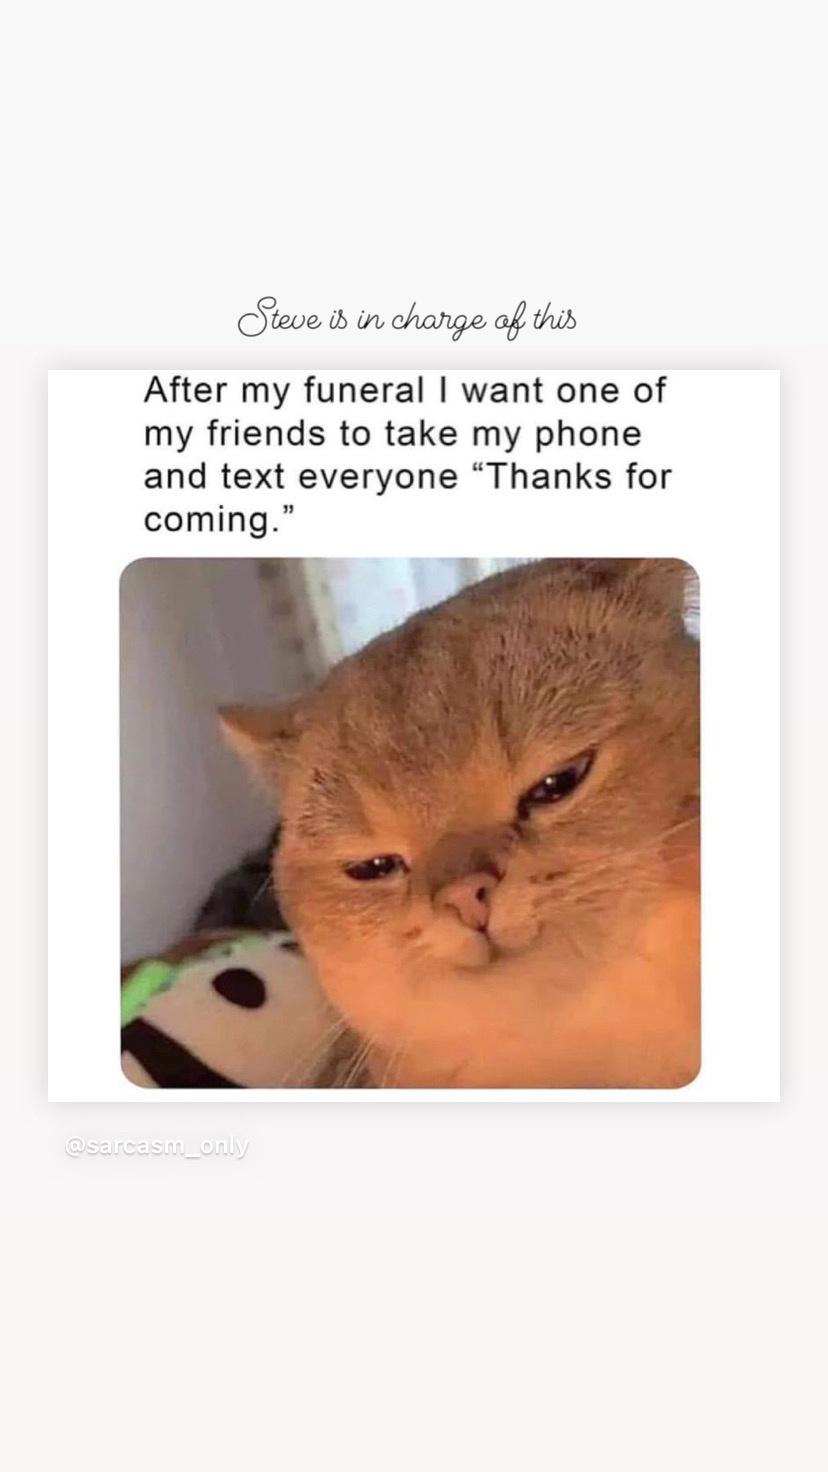 monday morning randomness - photo caption - Steve is in charge of this After my funeral I want one of my friends to take my phone and text everyone "Thanks for coming."